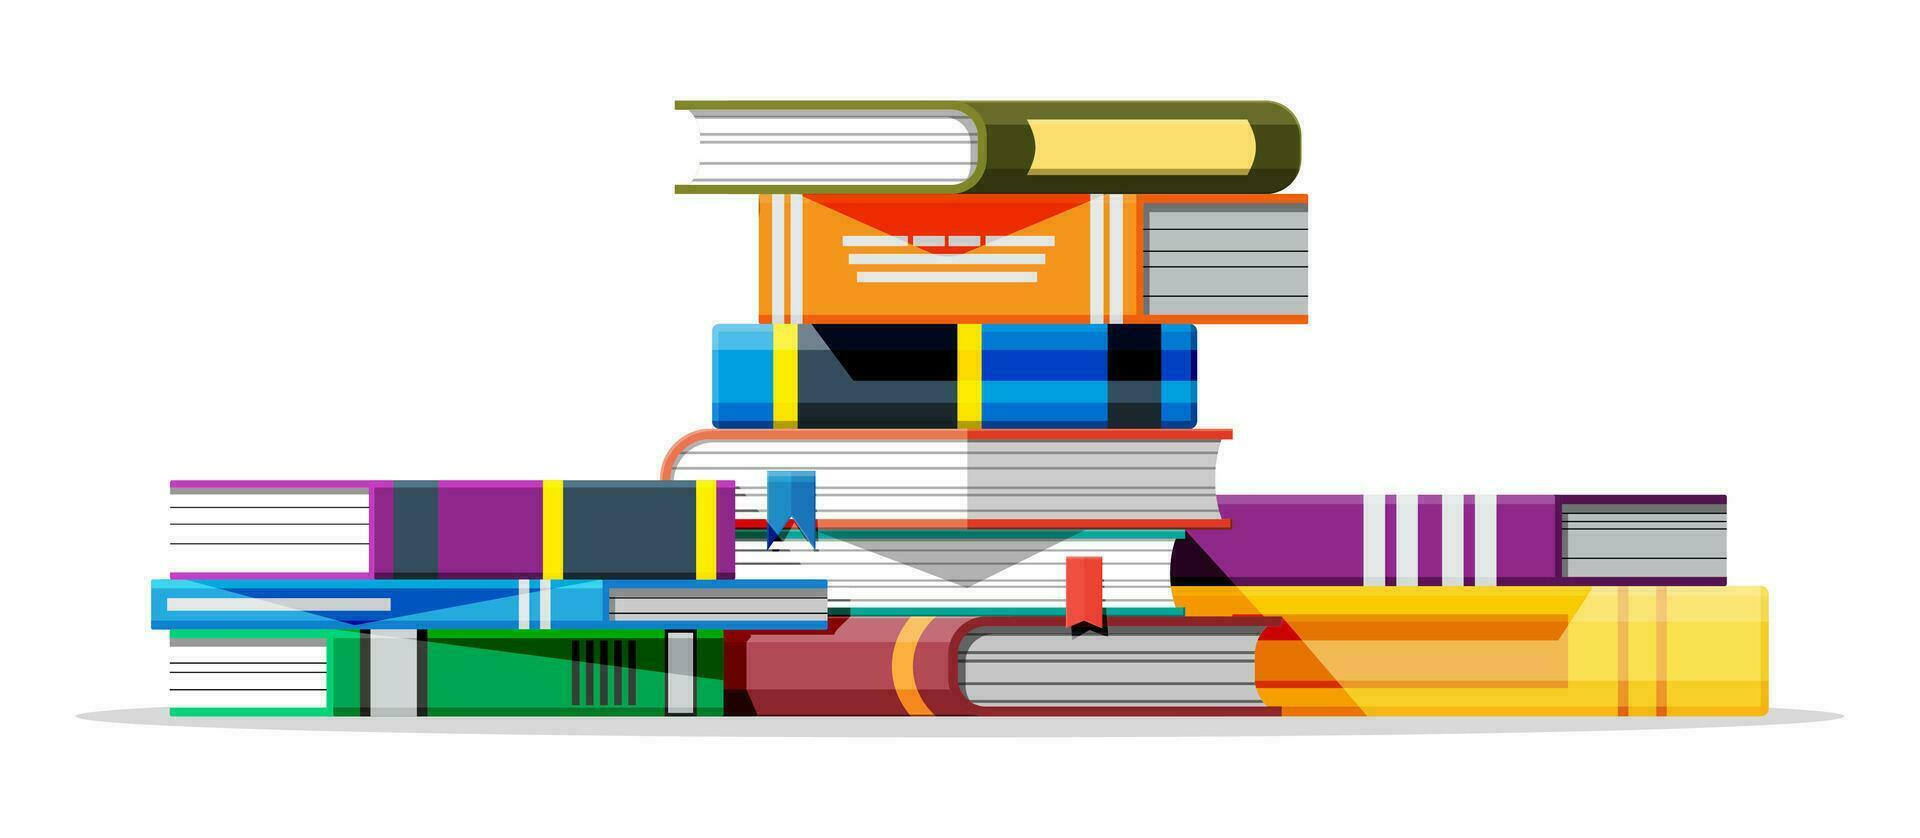 Pile of books isolated on white background. Book cover in various colors. Reading education, e-book, literature, encyclopedia. Vector illustration in flat style